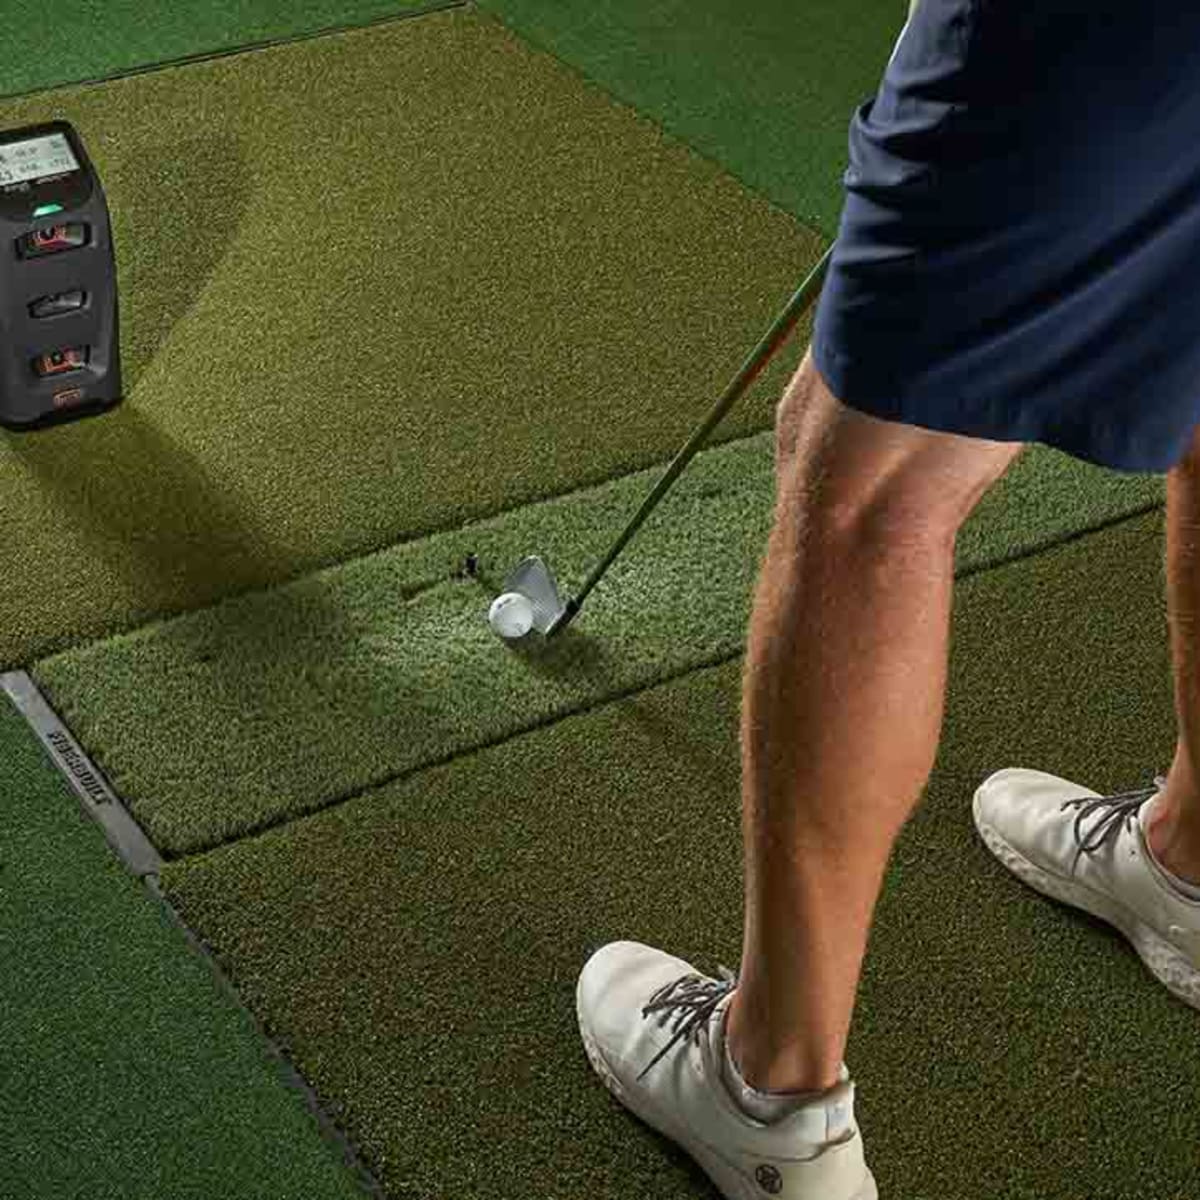 A launch monitor and simulator solves a writer's chipping woes - Sports  Illustrated Golf: News, Scores, Equipment, Instruction, Travel, Courses